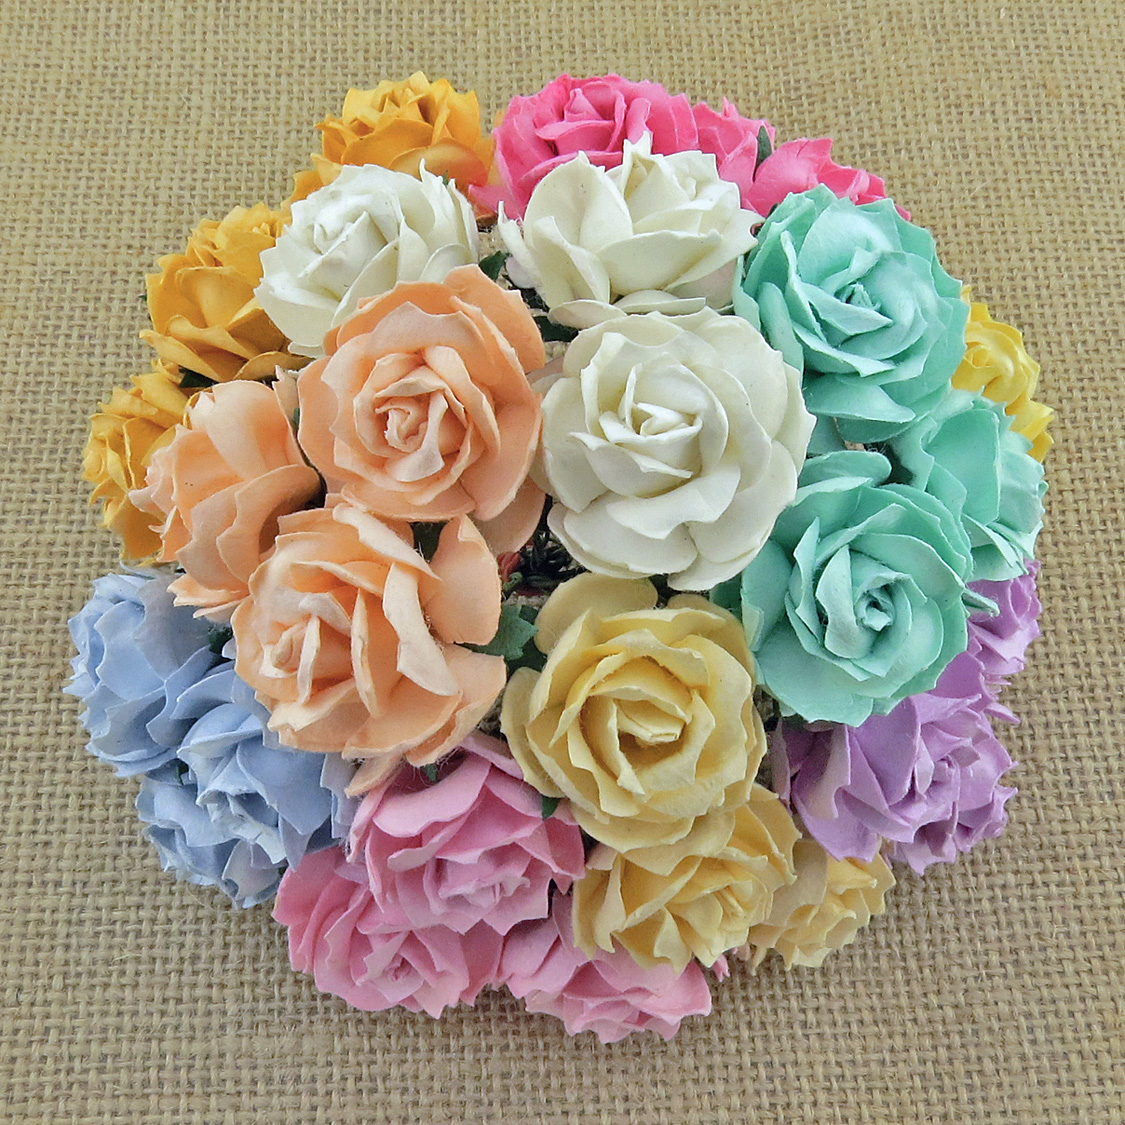 50 MIXED PASTEL COLOUR MULBERRY PAPER WILD ROSES 30mm